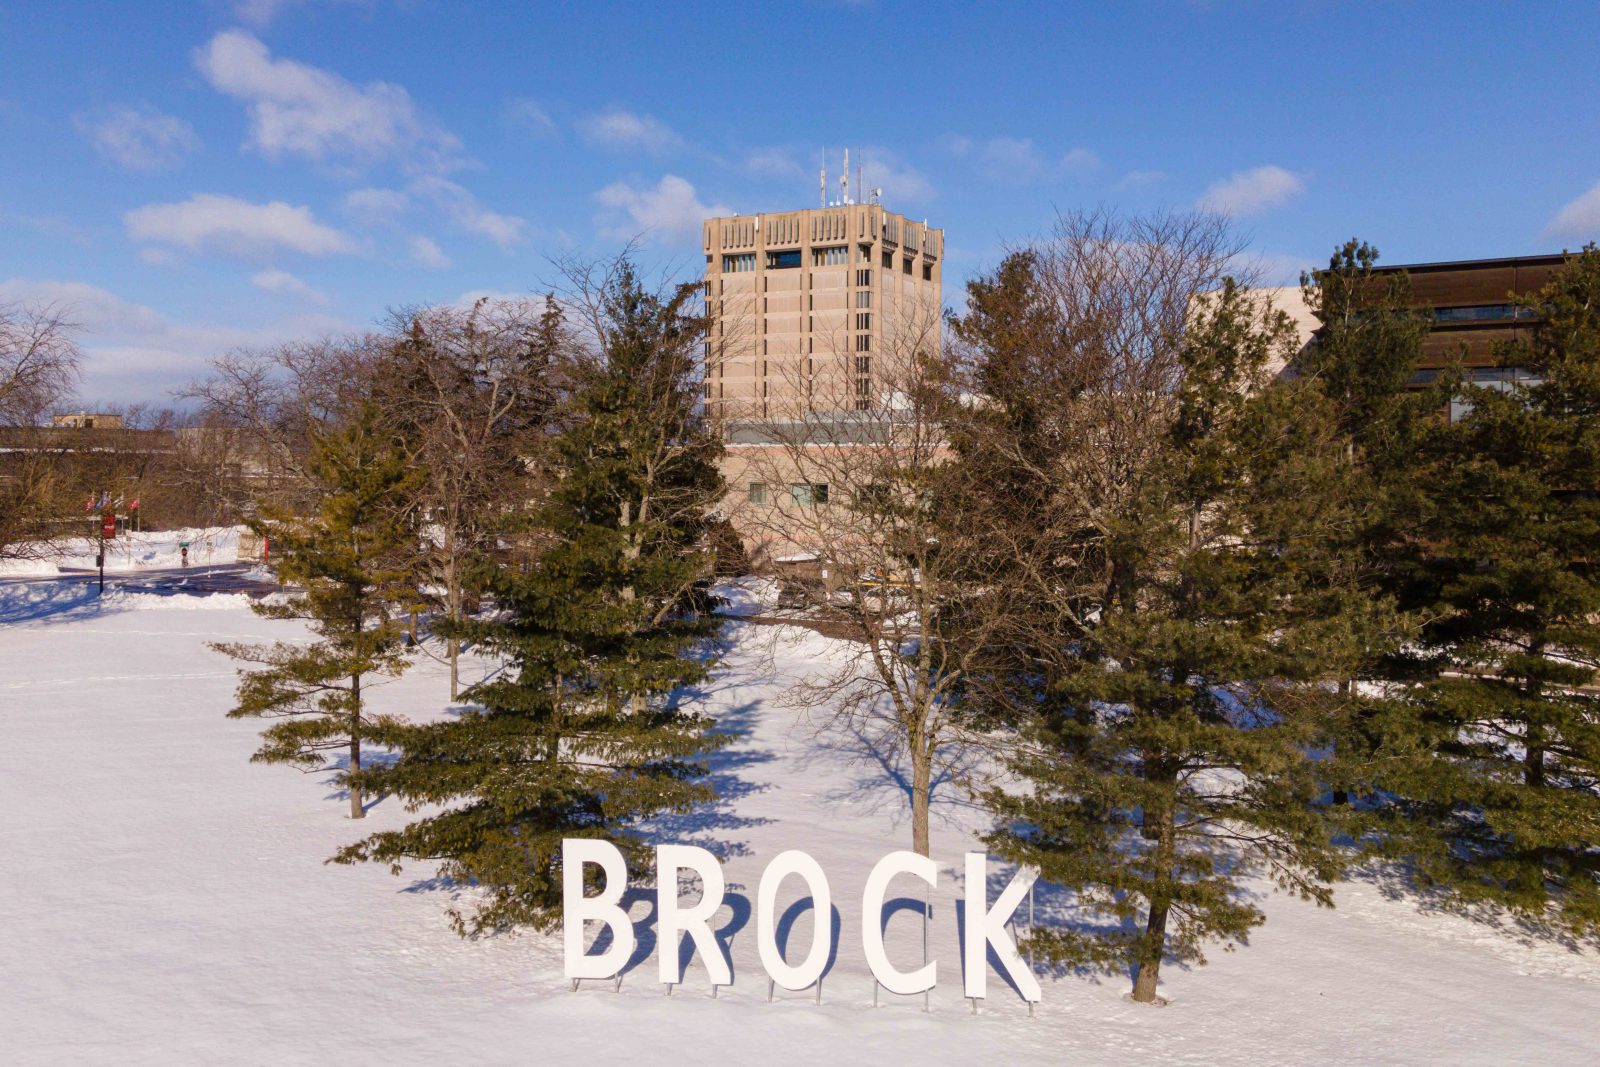 Large white letters spelling "Brock" stand in front of trees in the snow. A concrete tower and brown building are visible in the background.